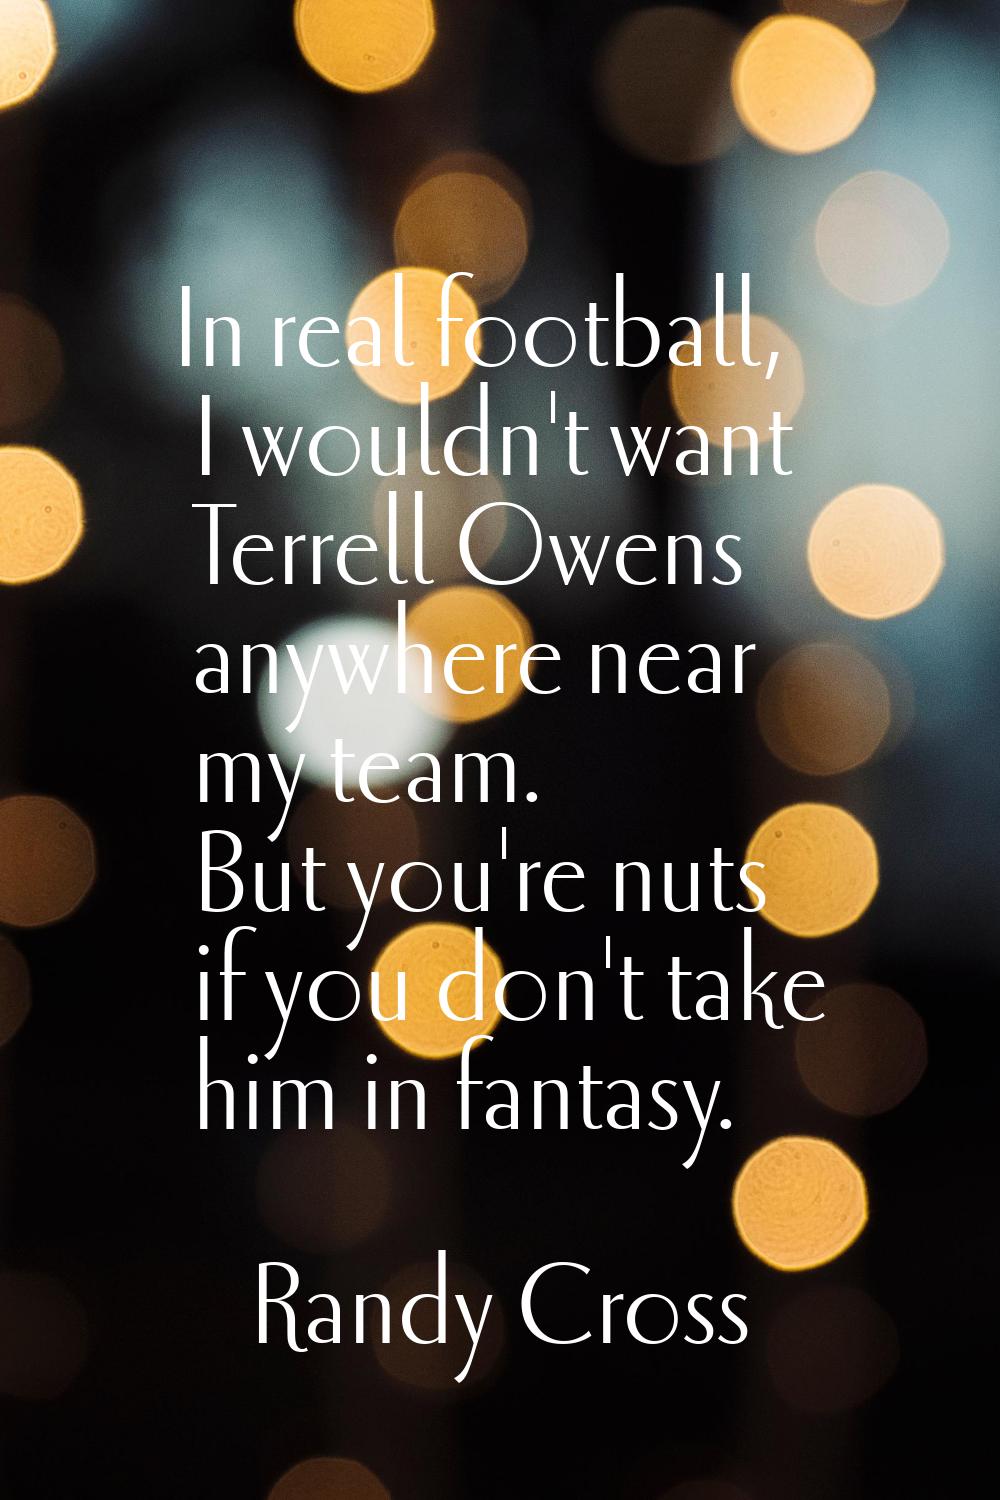 In real football, I wouldn't want Terrell Owens anywhere near my team. But you're nuts if you don't